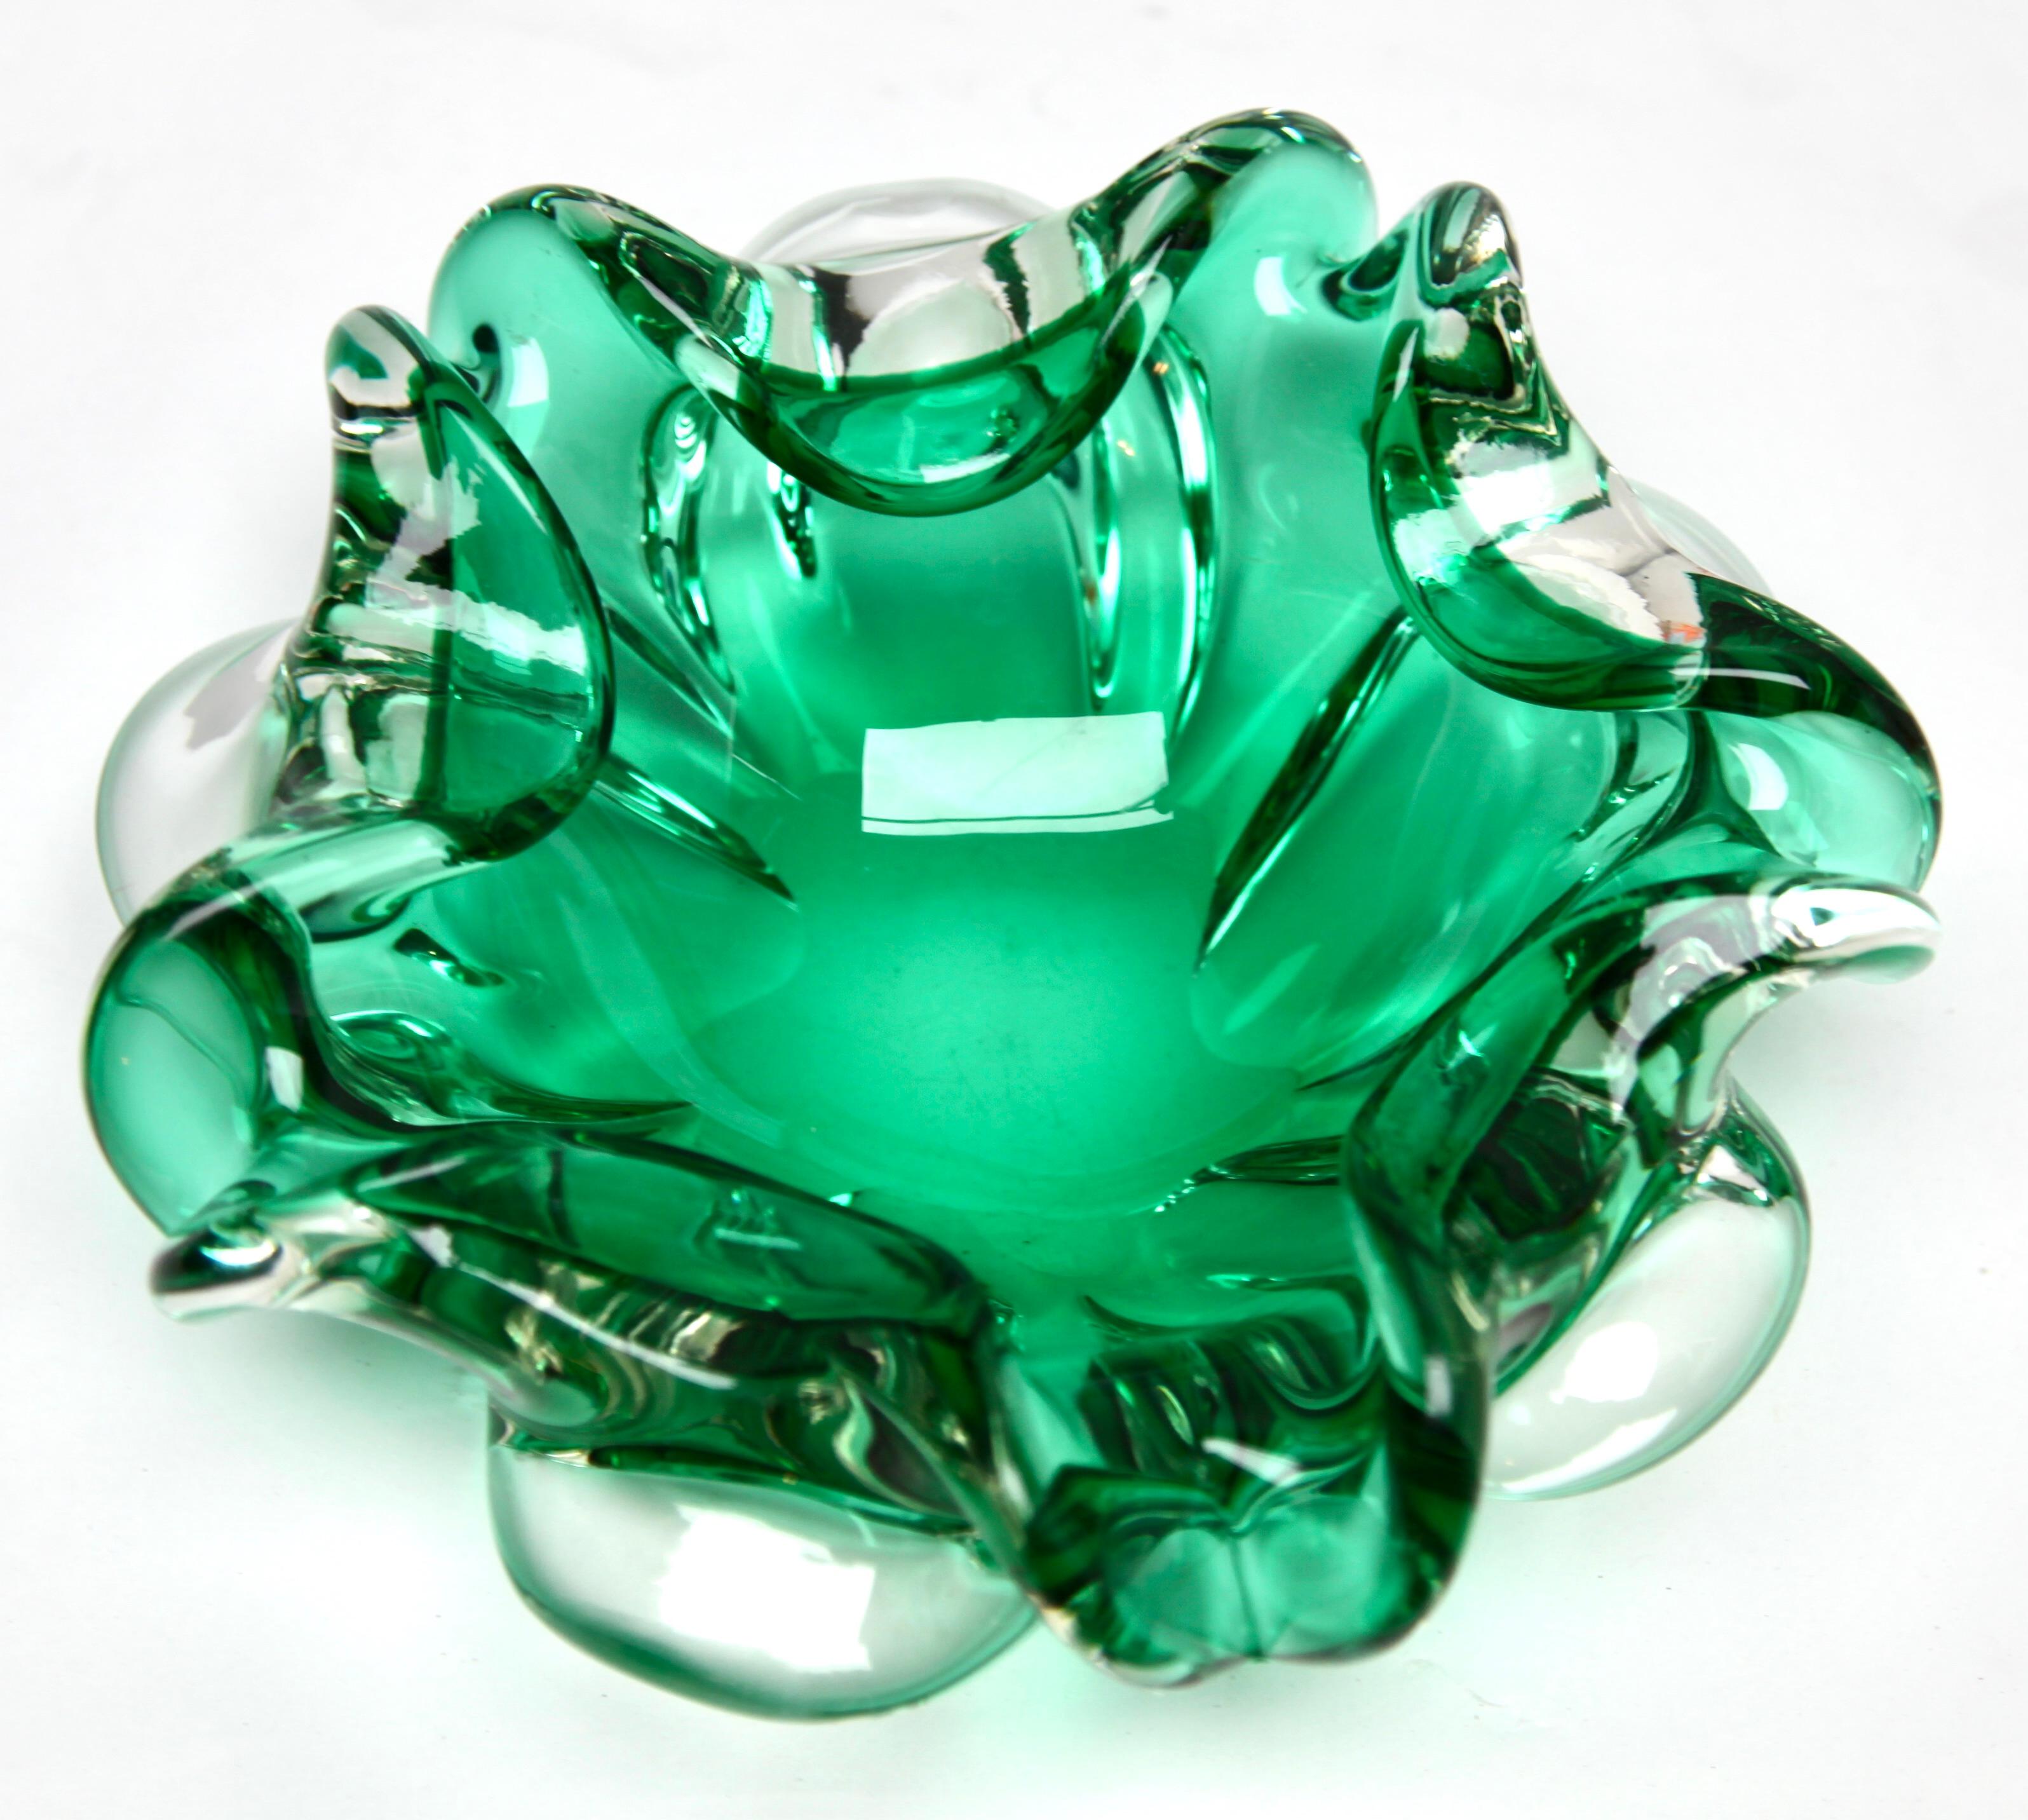 Faceted Murano Glass Chartreuse Ruffle Biomorphic Bowl of 1950s